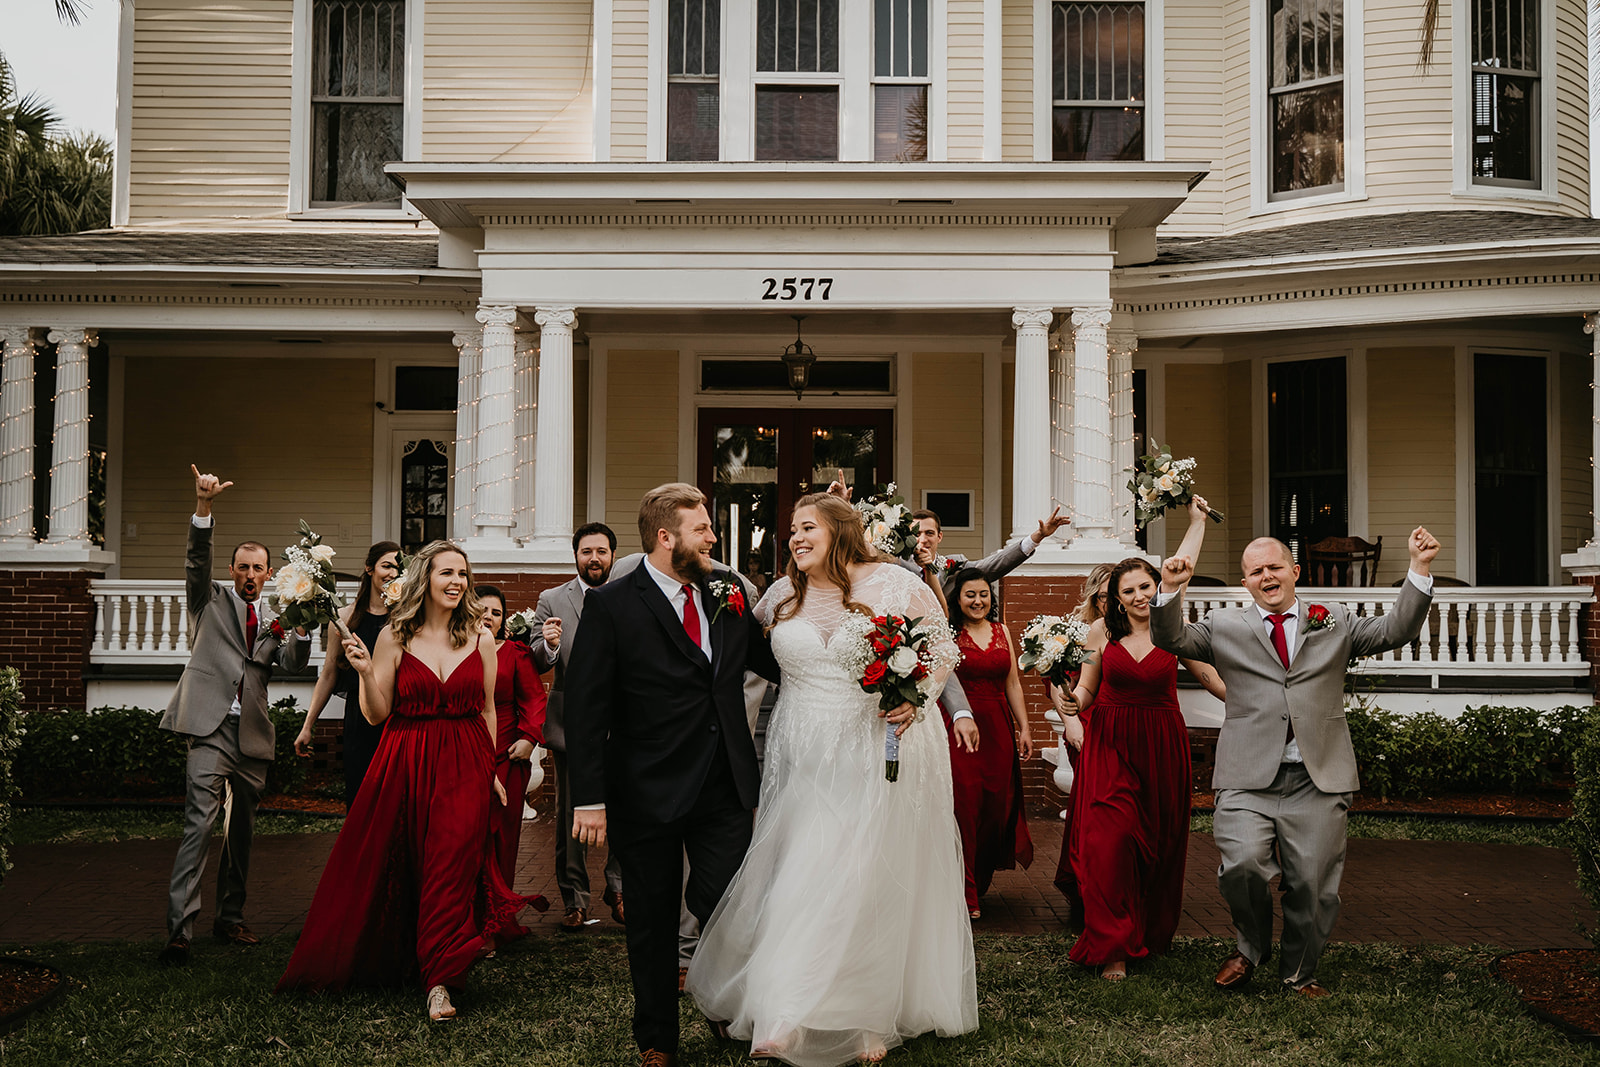 Colorful Bridal Party Wedding Portraits at The Heitman House